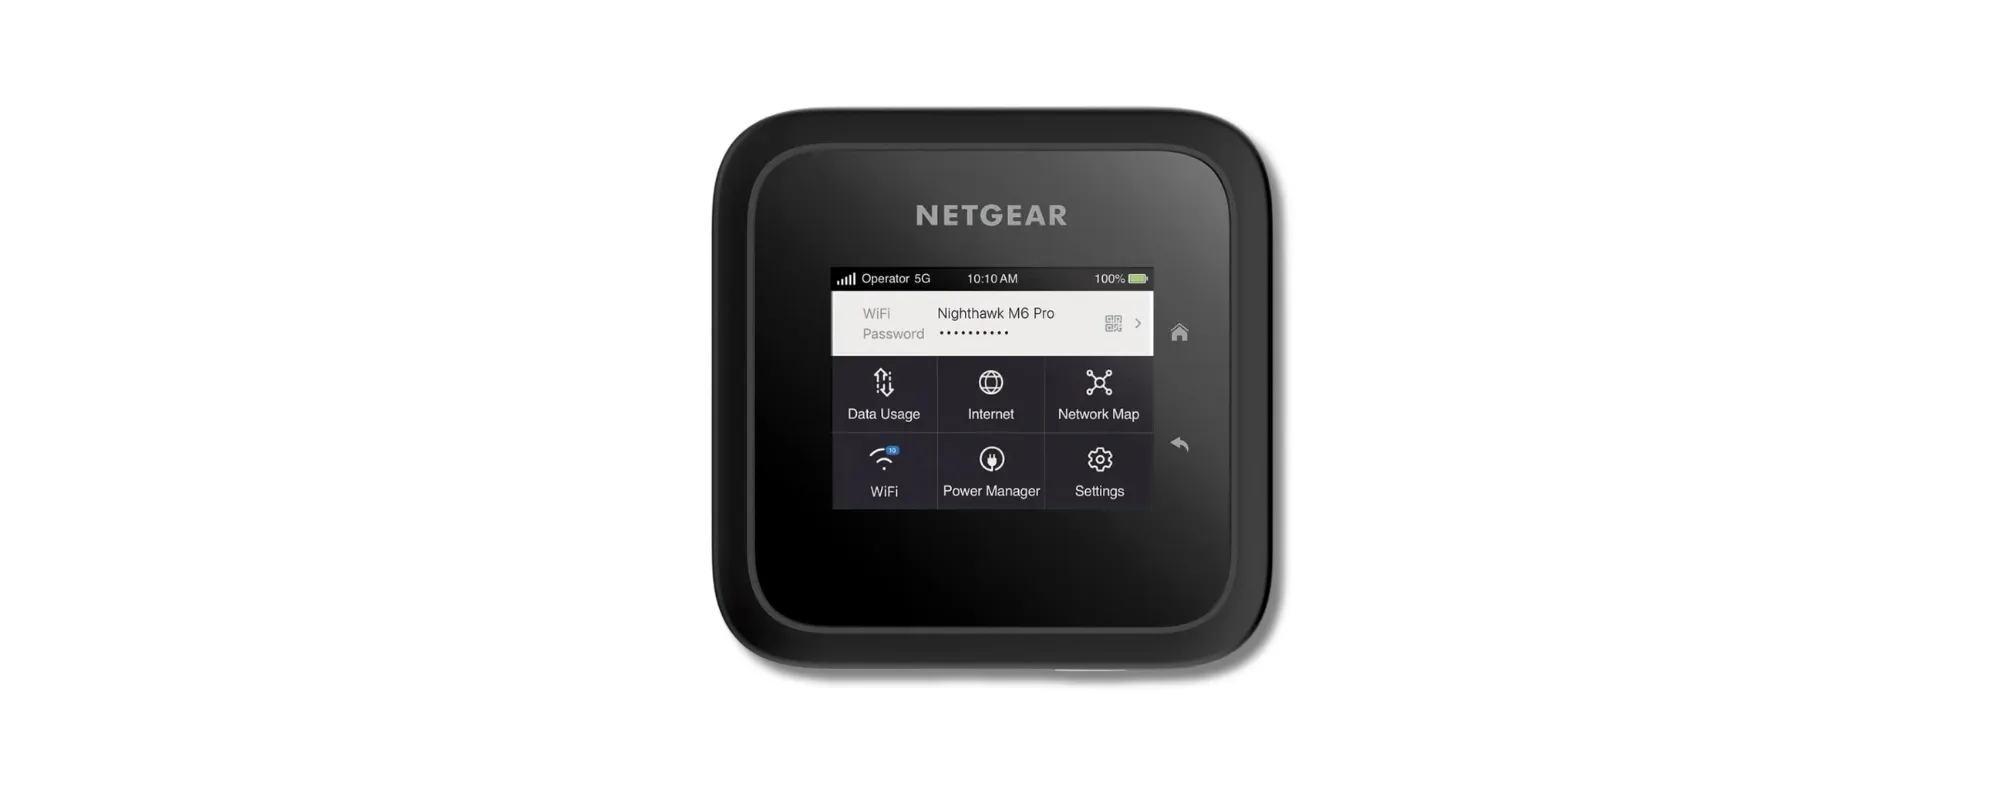 Are you a heavy phone hotspot user? Get this mobile hotspot router